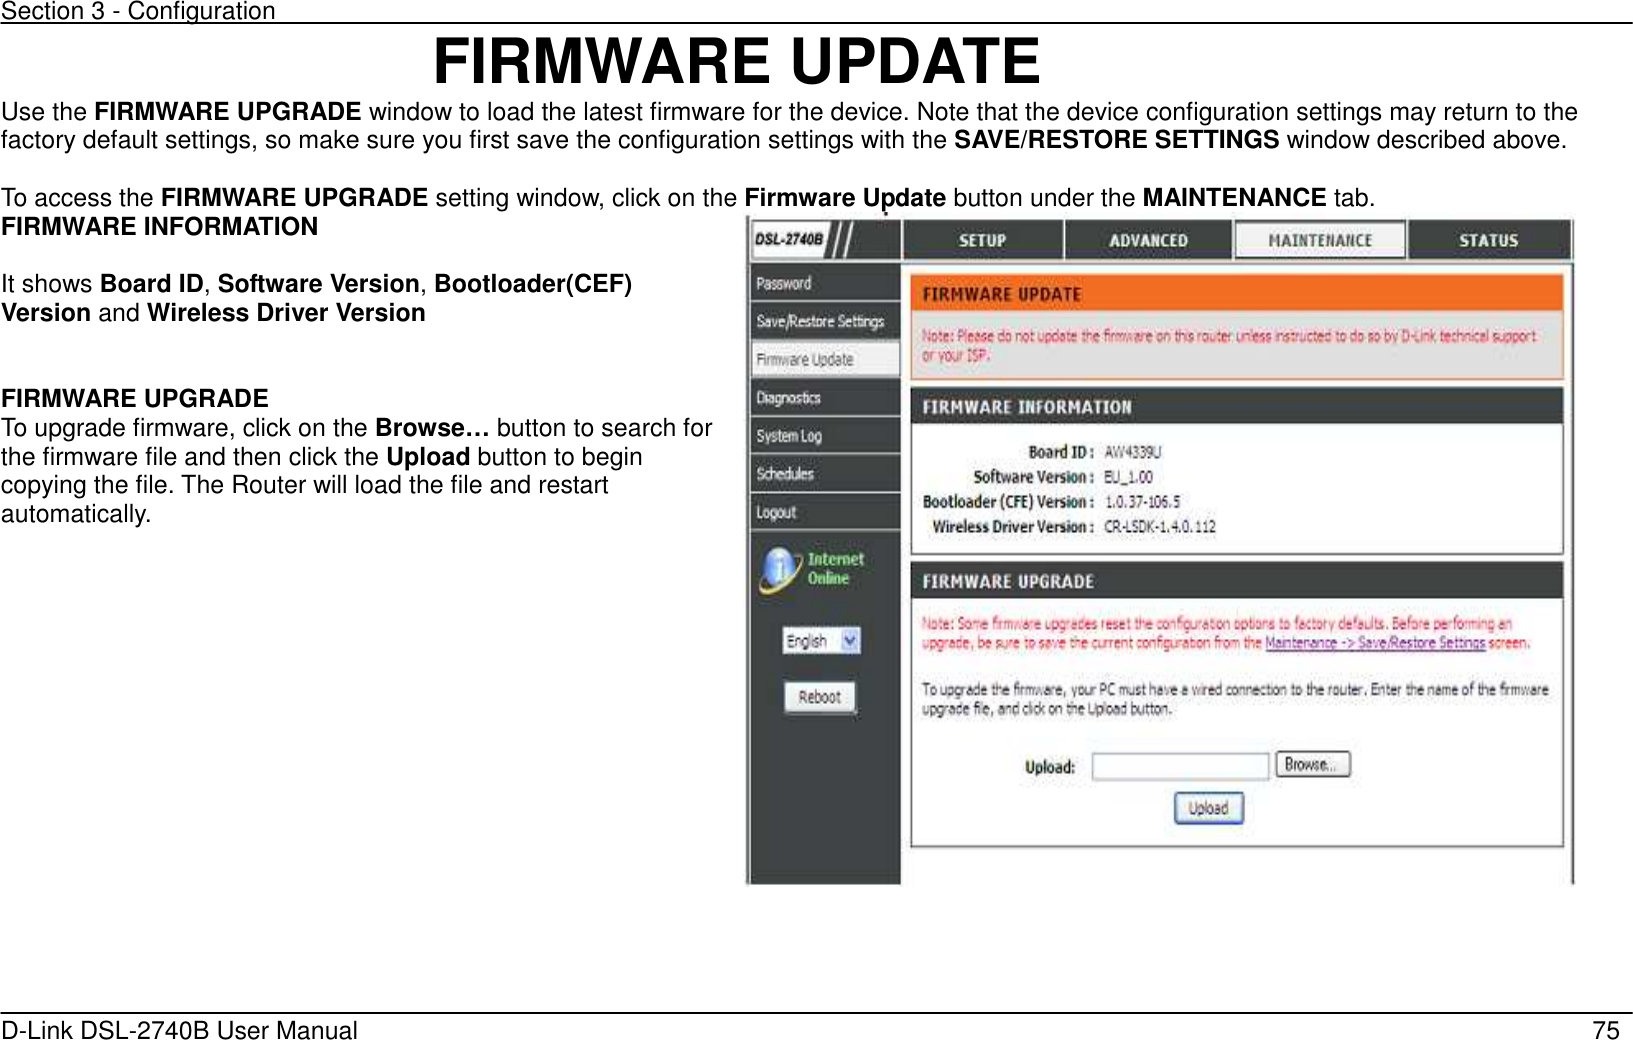 Section 3 - Configuration   D-Link DSL-2740B User Manual                                                  75 FIRMWARE UPDATE Use the FIRMWARE UPGRADE window to load the latest firmware for the device. Note that the device configuration settings may return to the factory default settings, so make sure you first save the configuration settings with the SAVE/RESTORE SETTINGS window described above.    To access the FIRMWARE UPGRADE setting window, click on the Firmware Update button under the MAINTENANCE tab. FIRMWARE INFORMATION    It shows Board ID, Software Version, Bootloader(CEF) Version and Wireless Driver Version   FIRMWARE UPGRADE To upgrade firmware, click on the Browse… button to search for the firmware file and then click the Upload button to begin copying the file. The Router will load the file and restart automatically.        